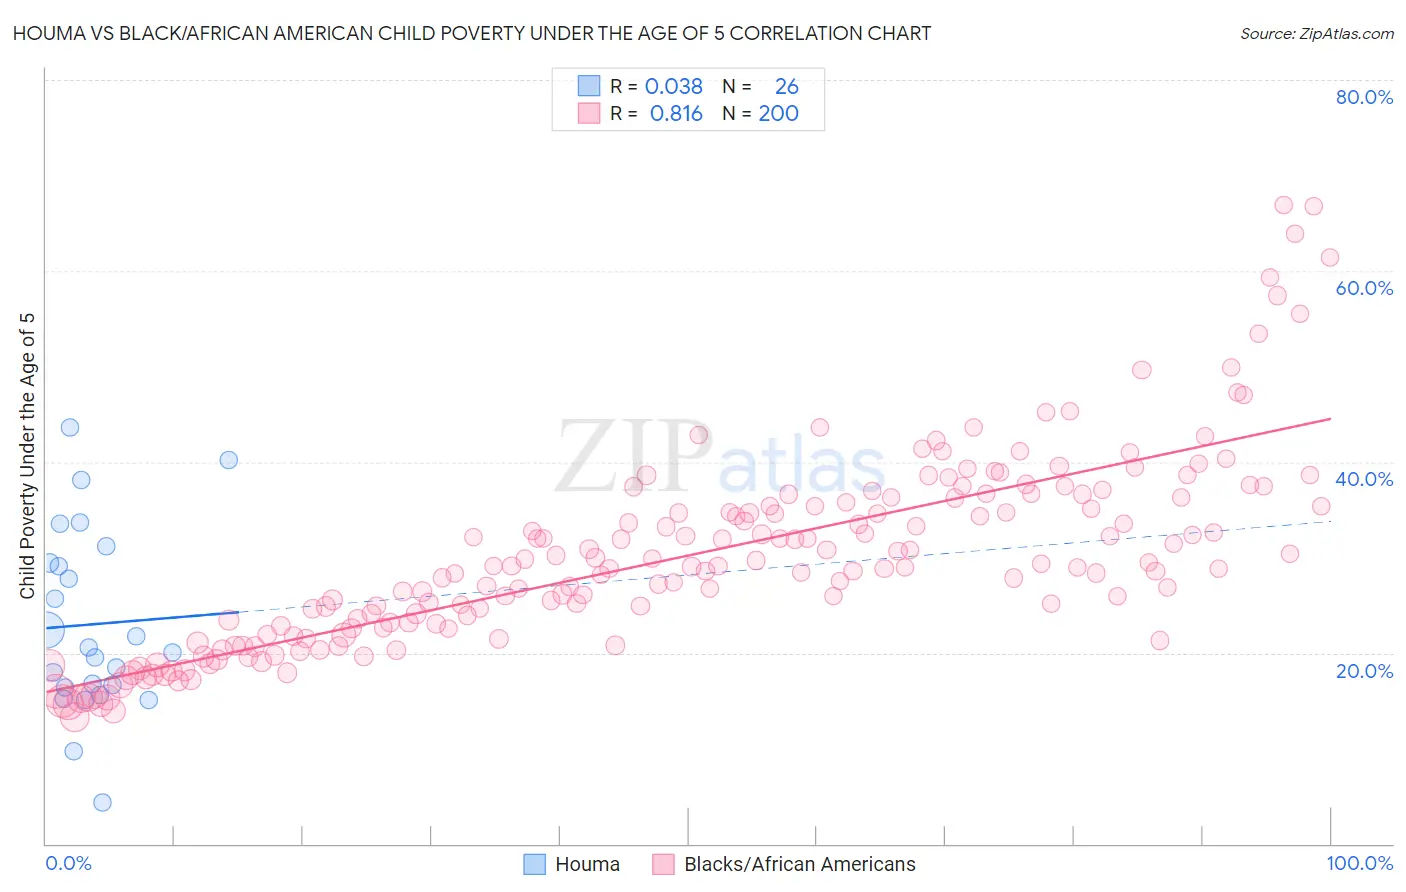 Houma vs Black/African American Child Poverty Under the Age of 5